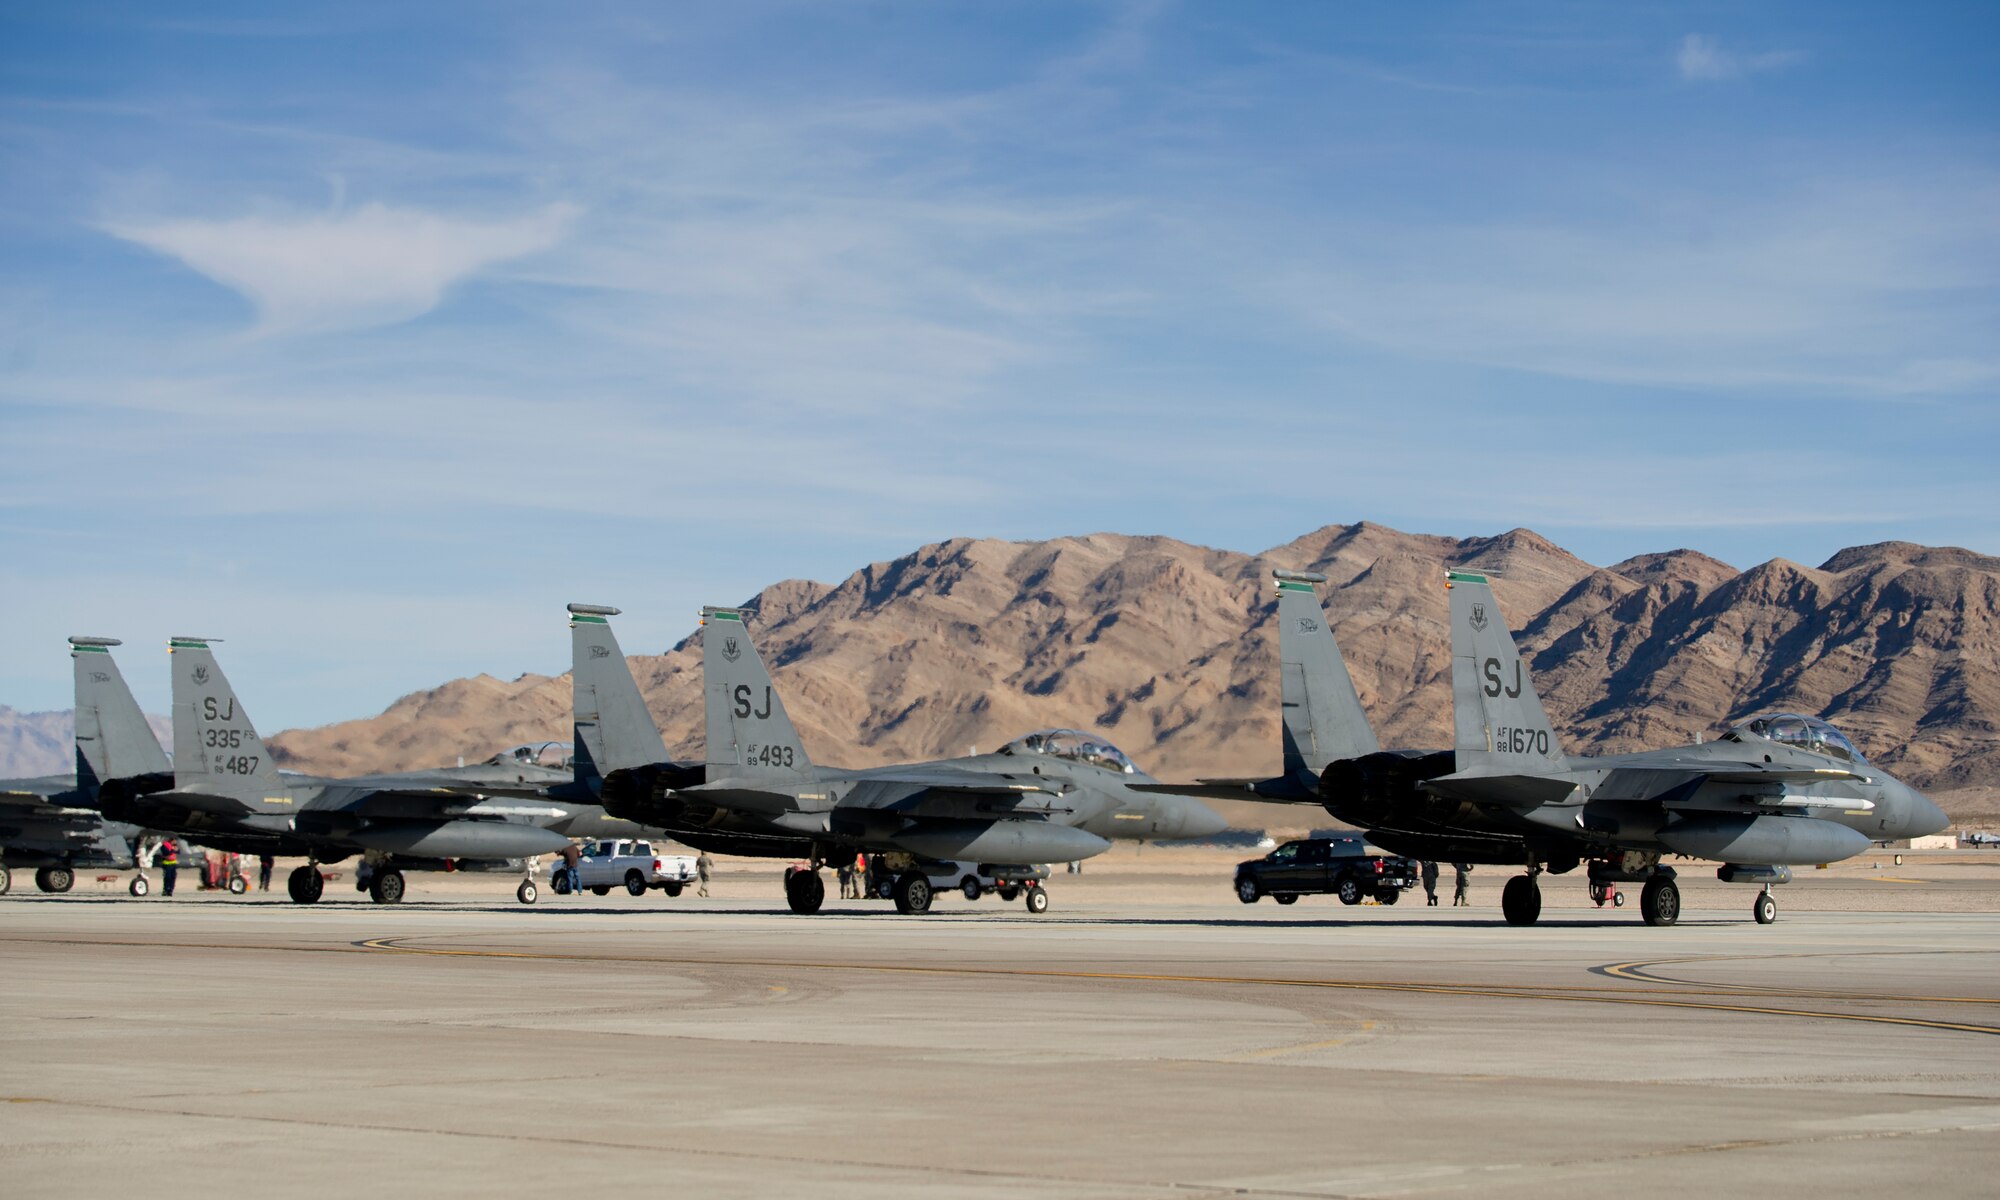 Three F-15E Strike Eagles from Seymour Johnson AFB, N.C., sit on the flightline before takeoff during the first day of Red Flag 16-1, Jan. 25 at Nellis AFB Nev. More than 130 aircraft and 3,000 personnel from more than 30 units including squadrons from Australia and the United Kingdom have arrived at Nellis to participate in the most realistic combat training available. (U.S. Air Force photo by Senior Airman Alex Fox Echols III/Released)  